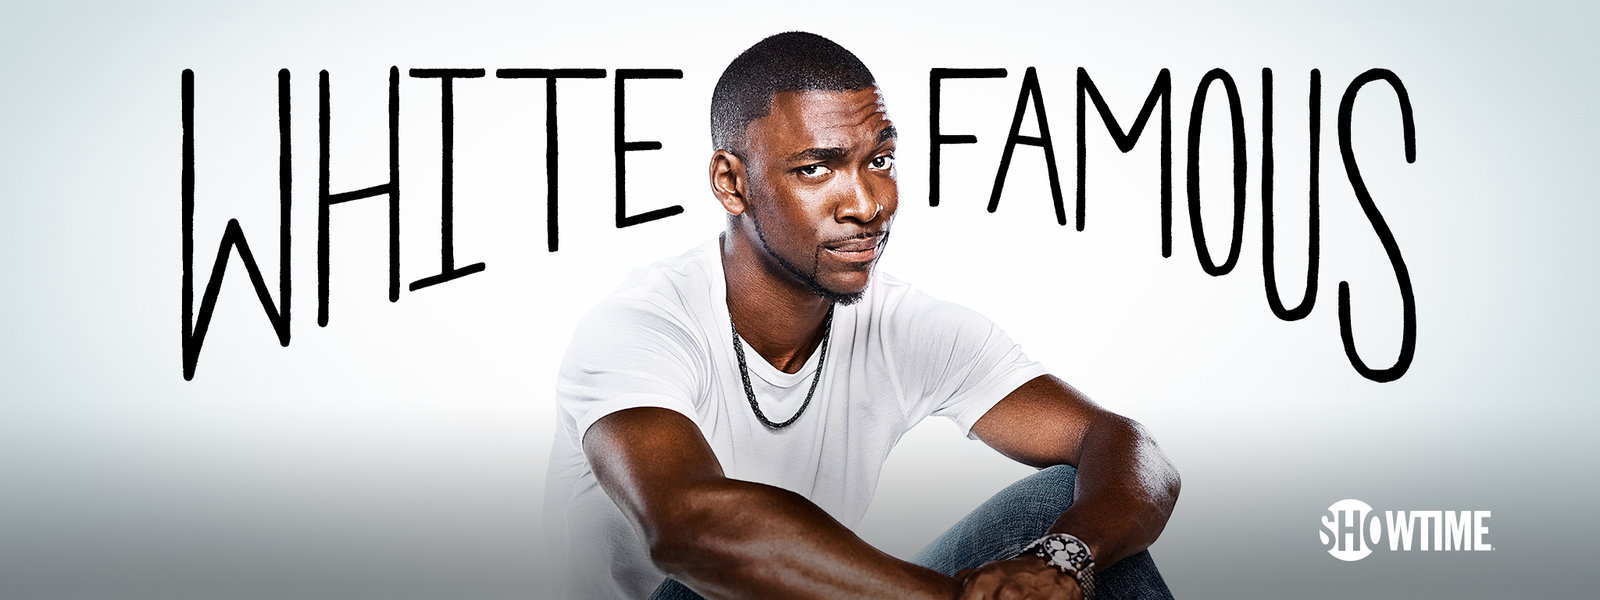 ‘White Famous’ Cancelled After One Season by Showtime